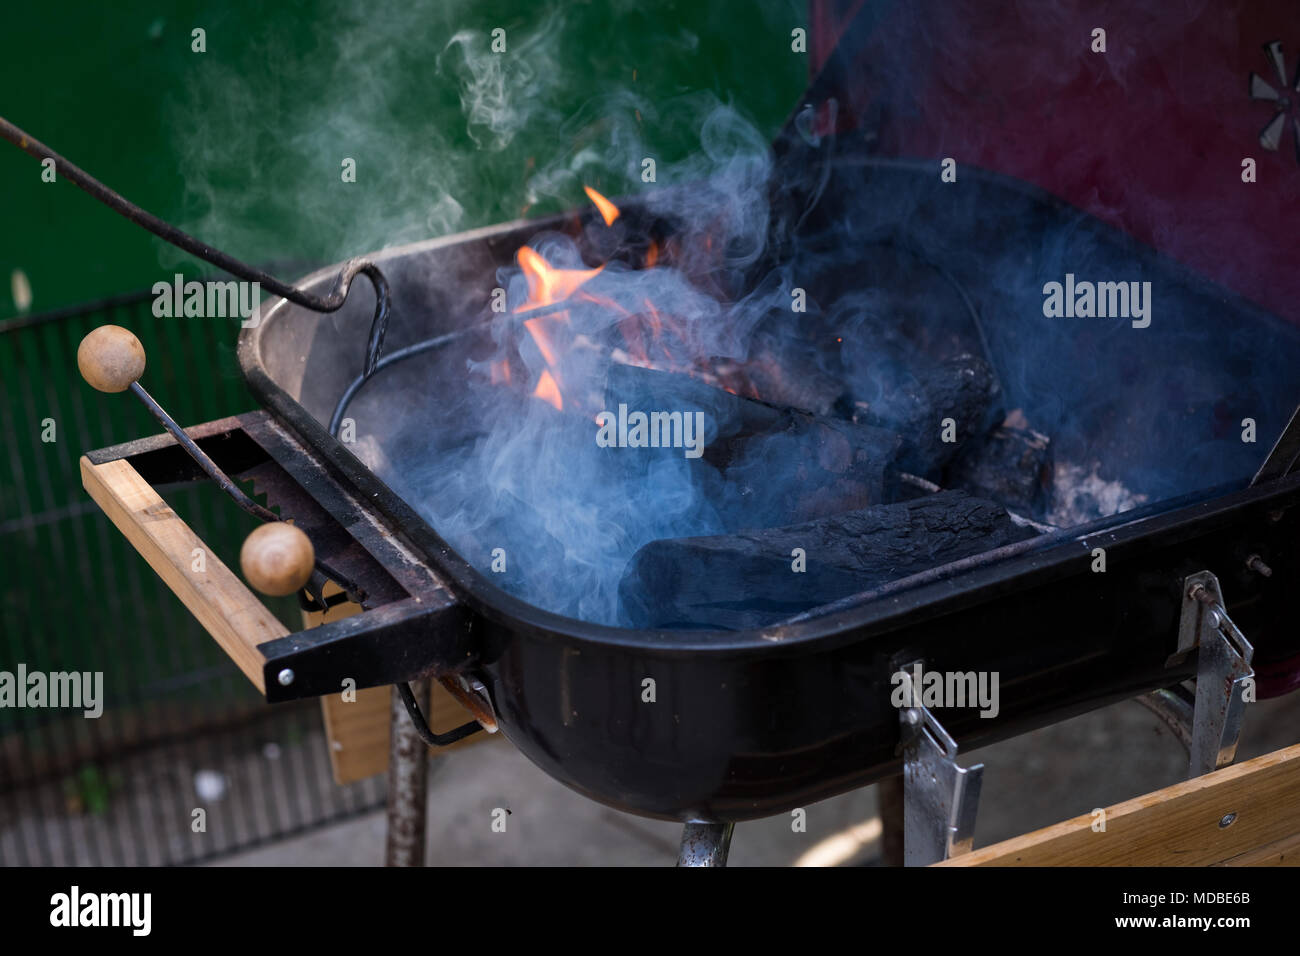 Turning charcoals on fire in a barbecue outside Stock Photo